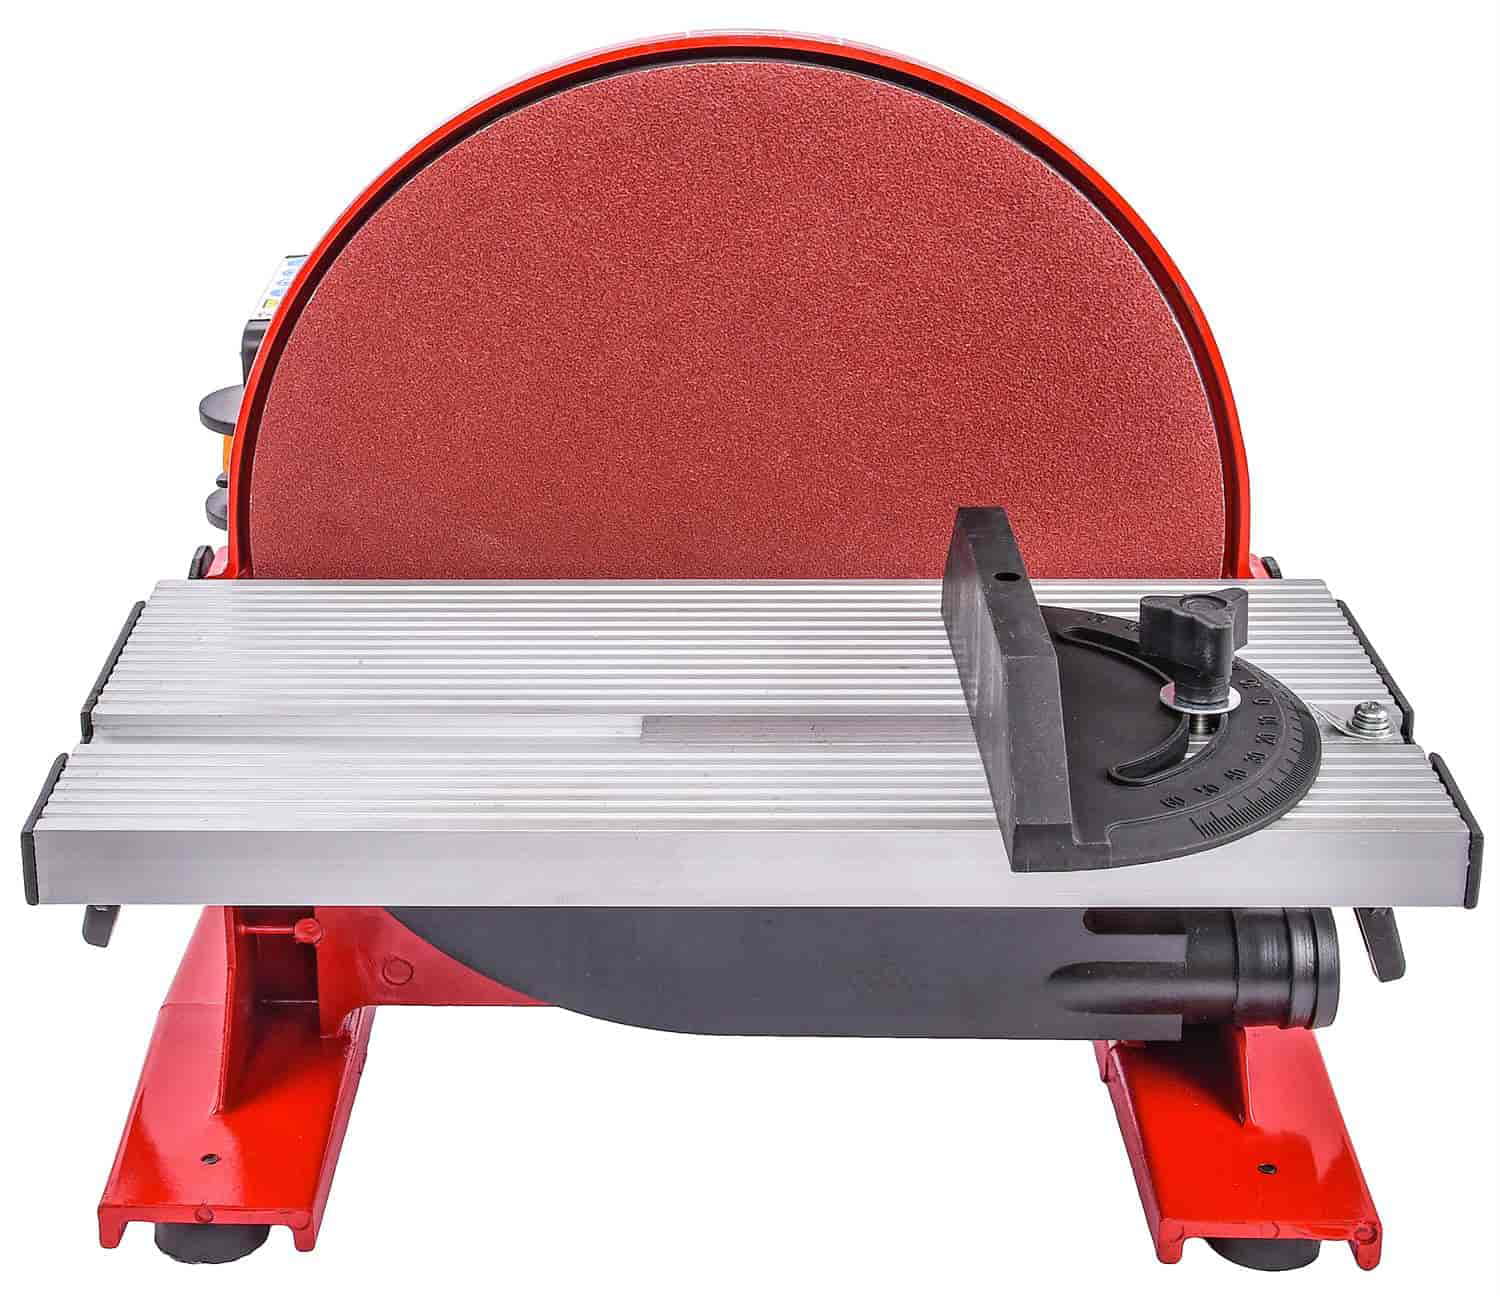 JEGS 81752 10 in. Disc Sander 3/4 HP 110 V Motor 1 750 RPM No-Load Speed  Accepts